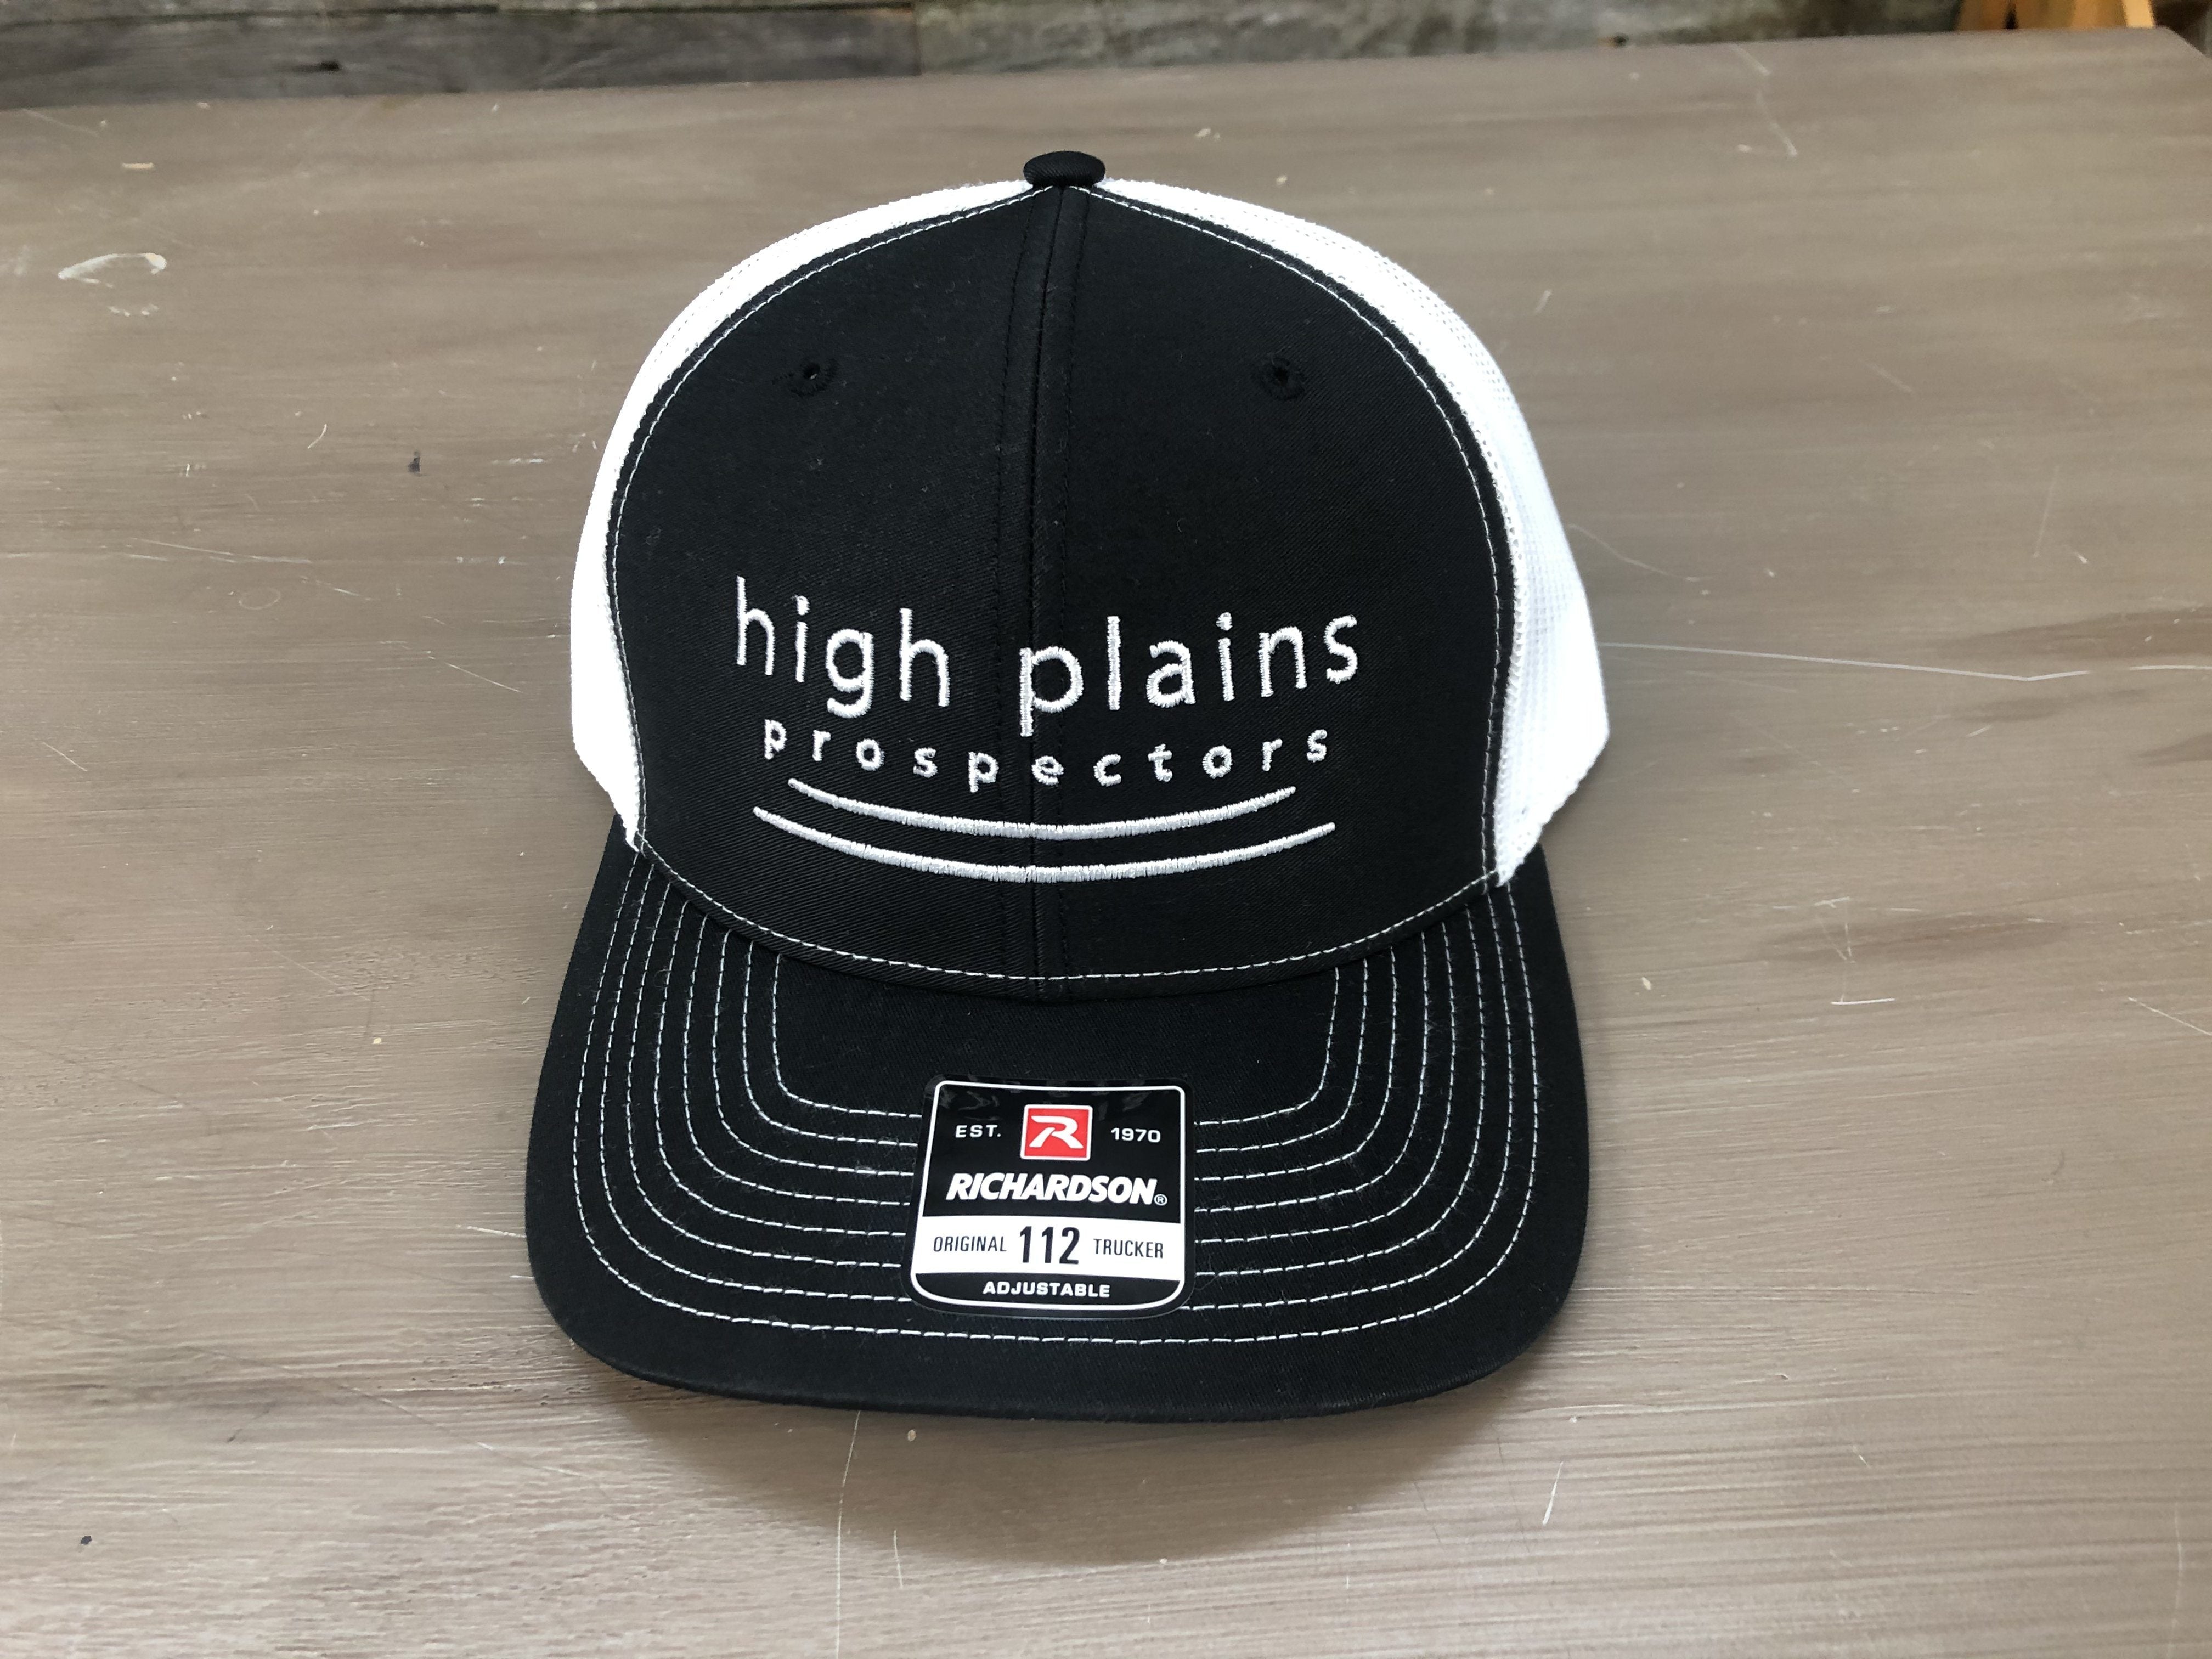 High Plains Prospectors - Recovery Team Metal Detecting Hat Black & White